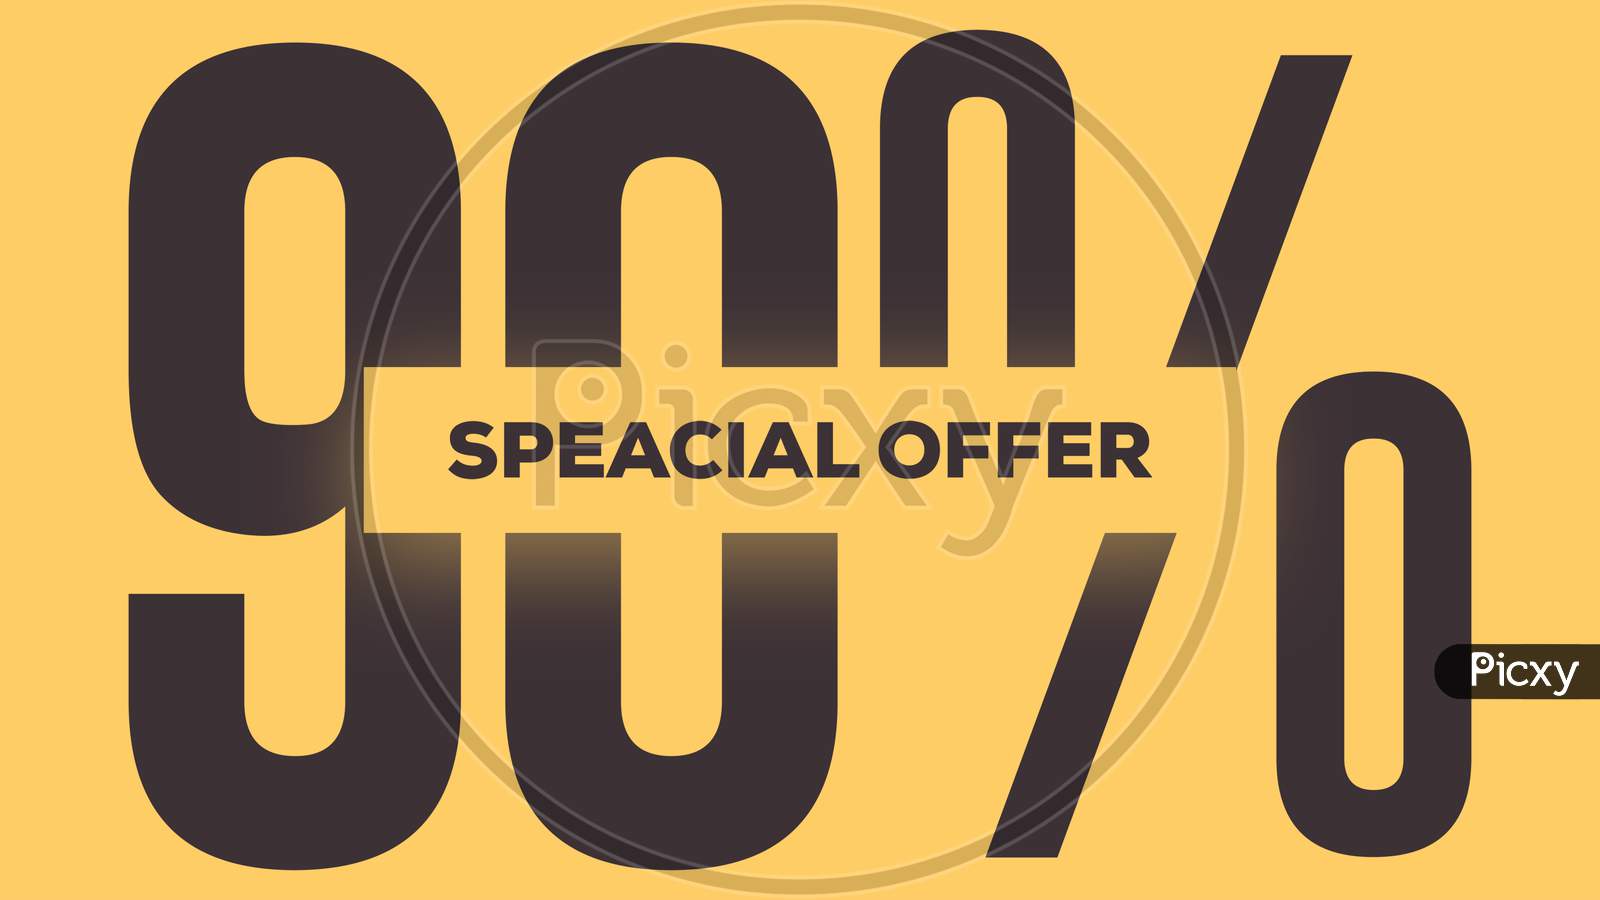 Speacial Offer 90% Off Illustration Use For Landing Page,Website, Poster, Banner, Flyer, Background,Label, Wallpaper,Sale Promotion,Advertising, Marketing On Yellow Background